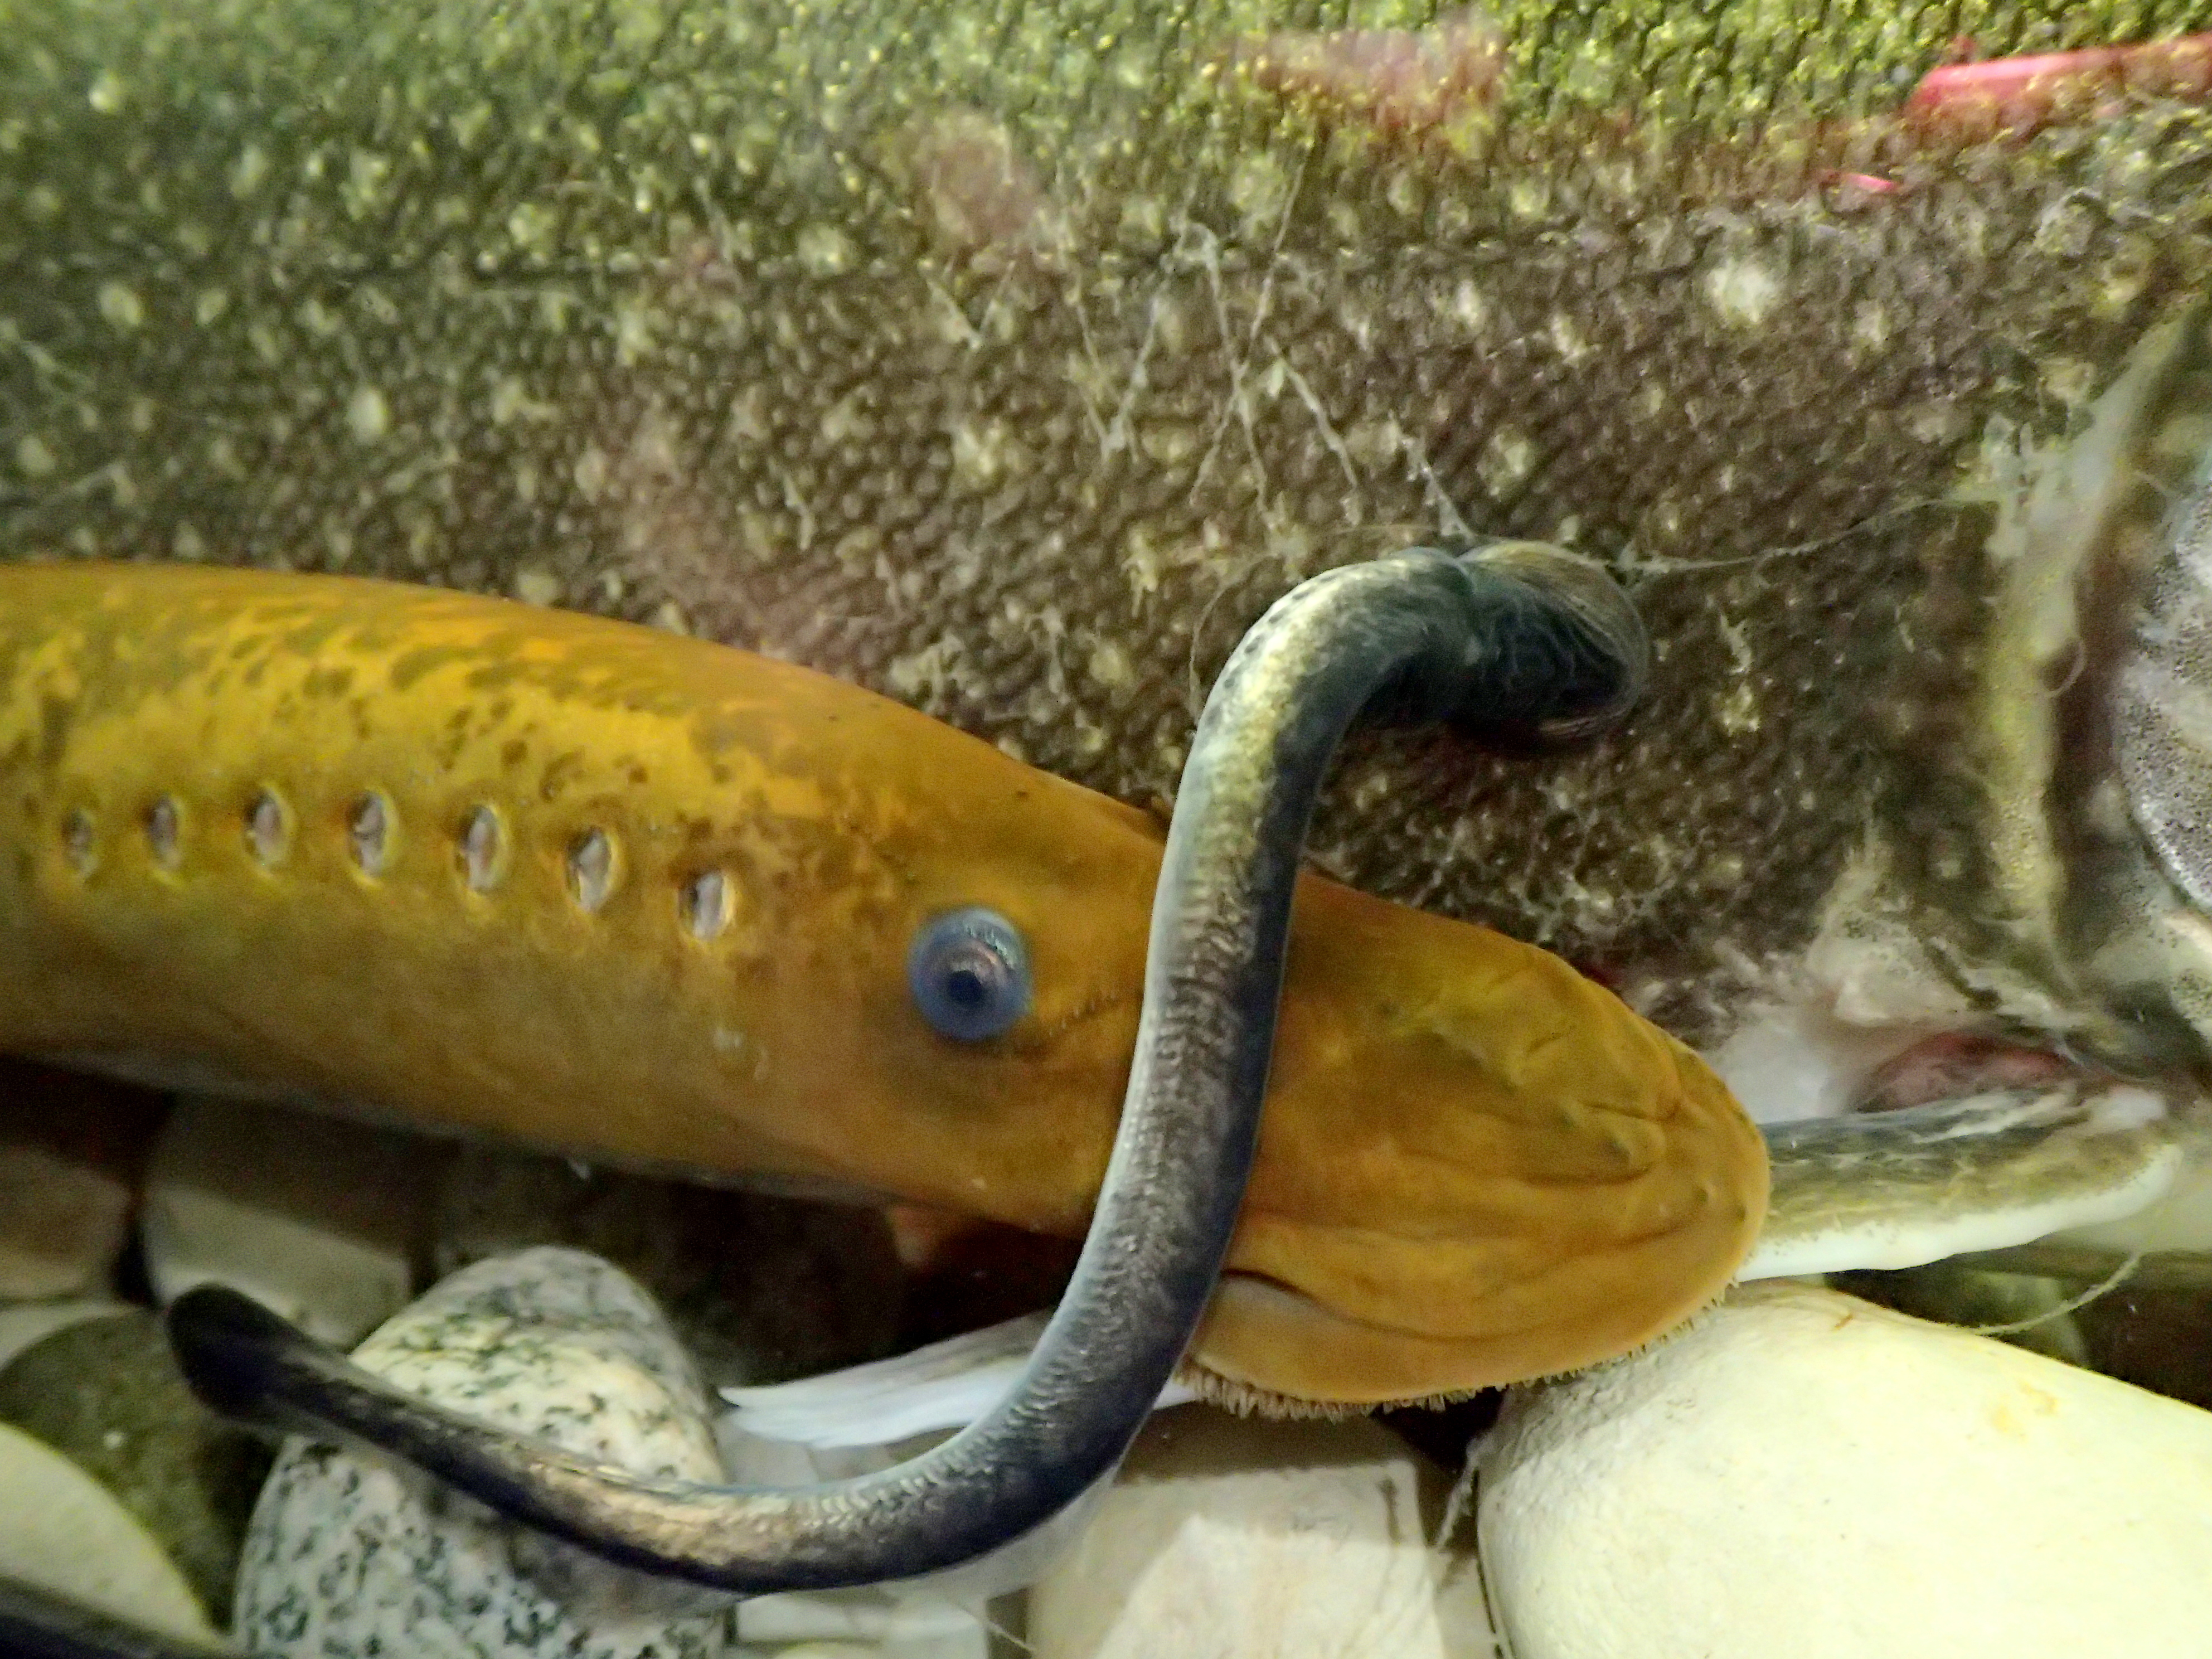 Photo of the side of a lake trout.  There is an adult sea lamprey beside it and a young sea lamprey attached to the side of the lake trout.